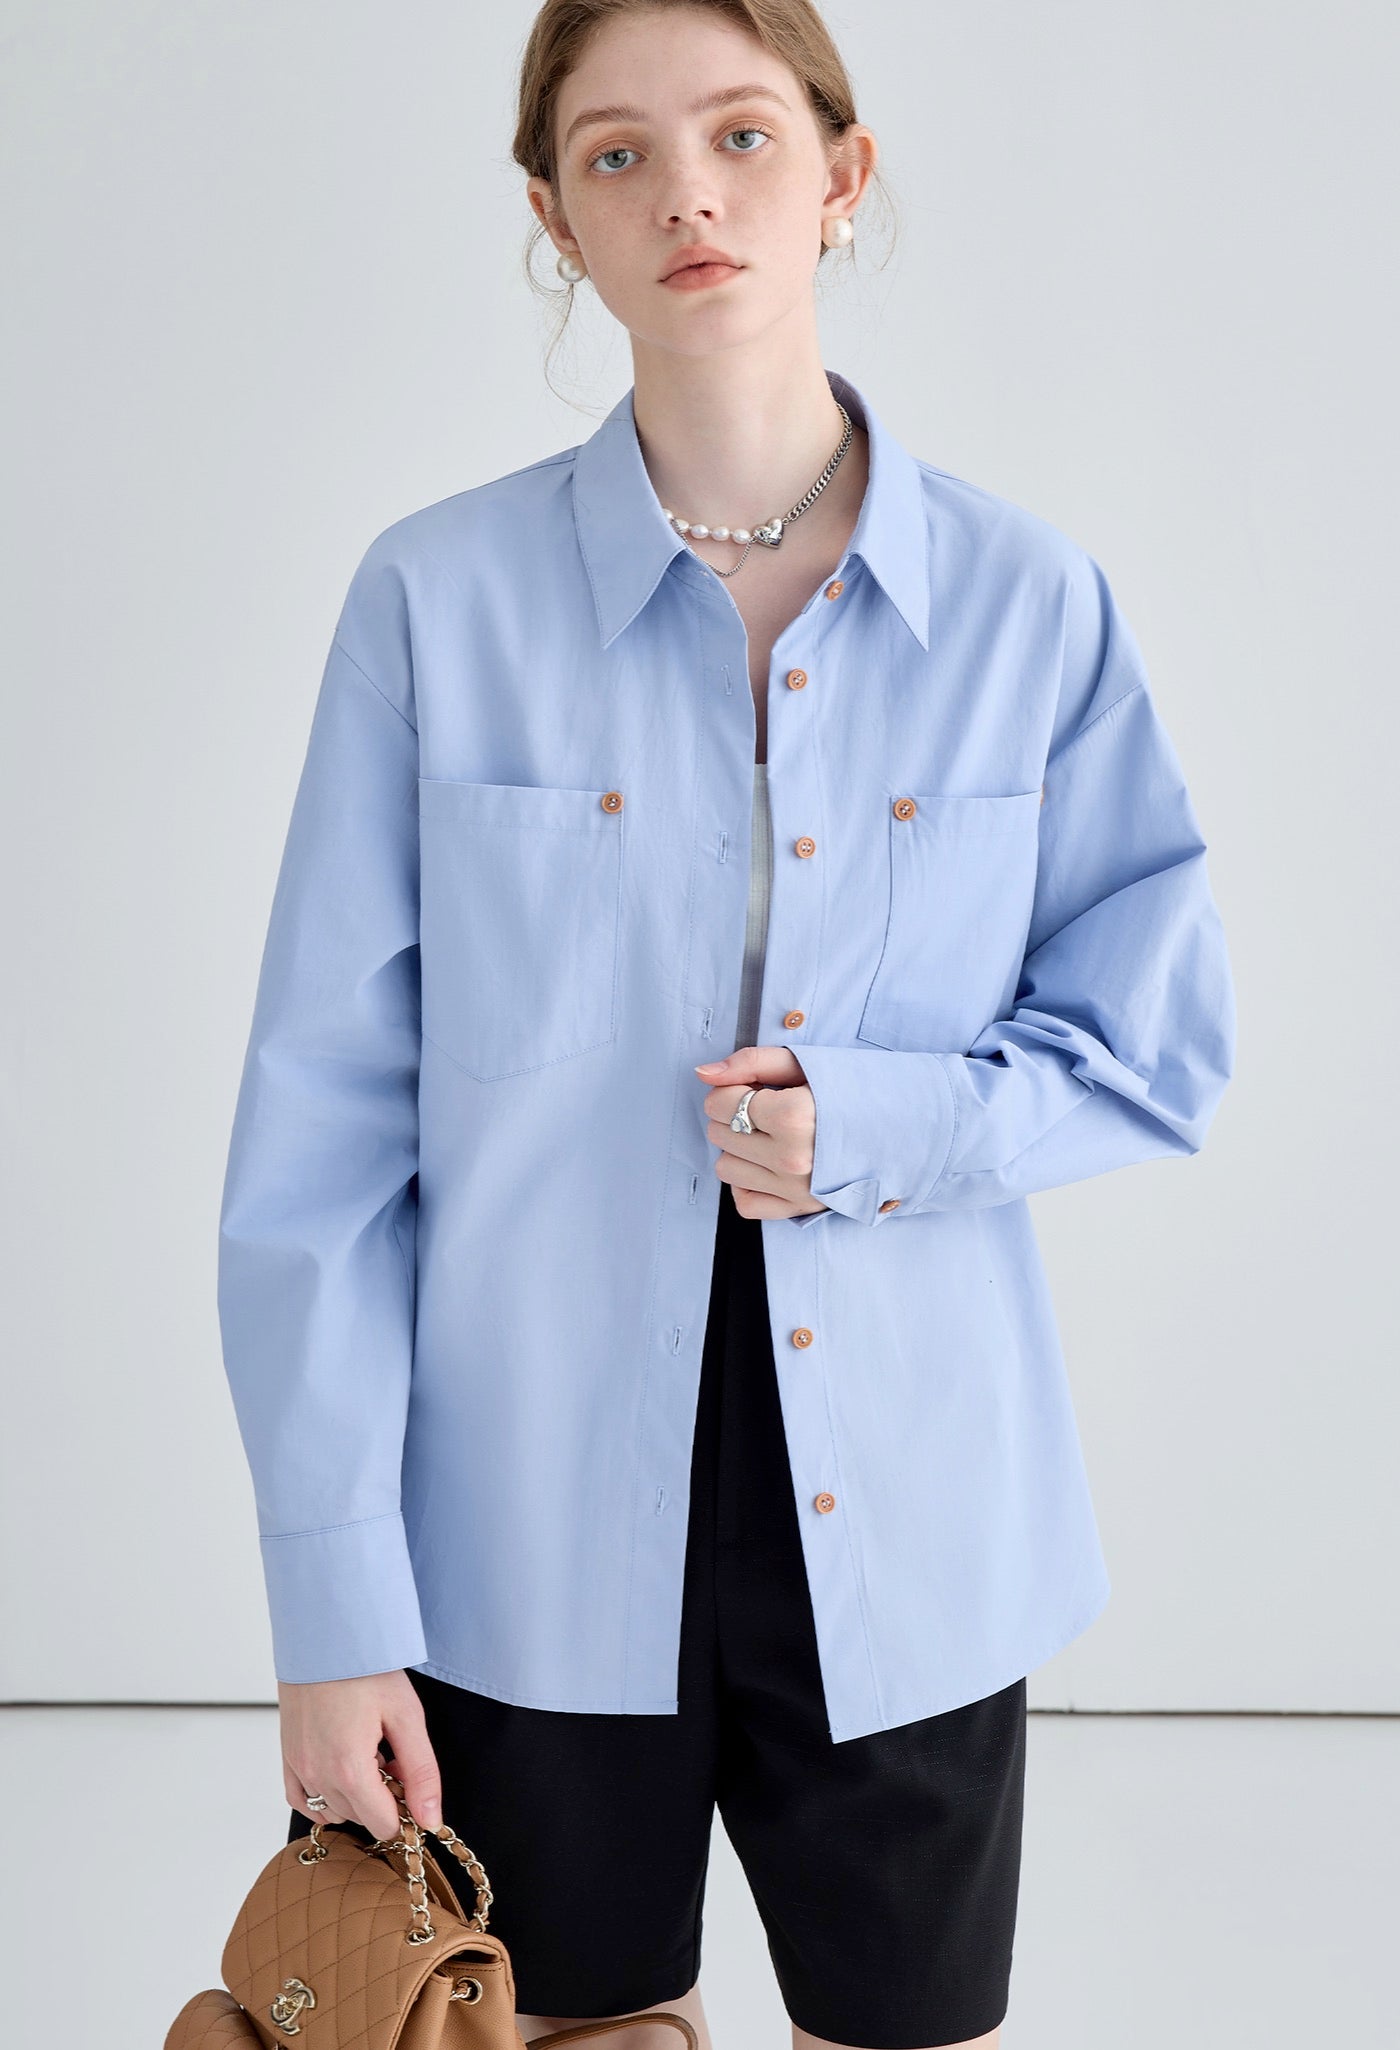 loose,collar,shirts,white,blue,pink,green,simple,cute,cool,sexy,mode,modern